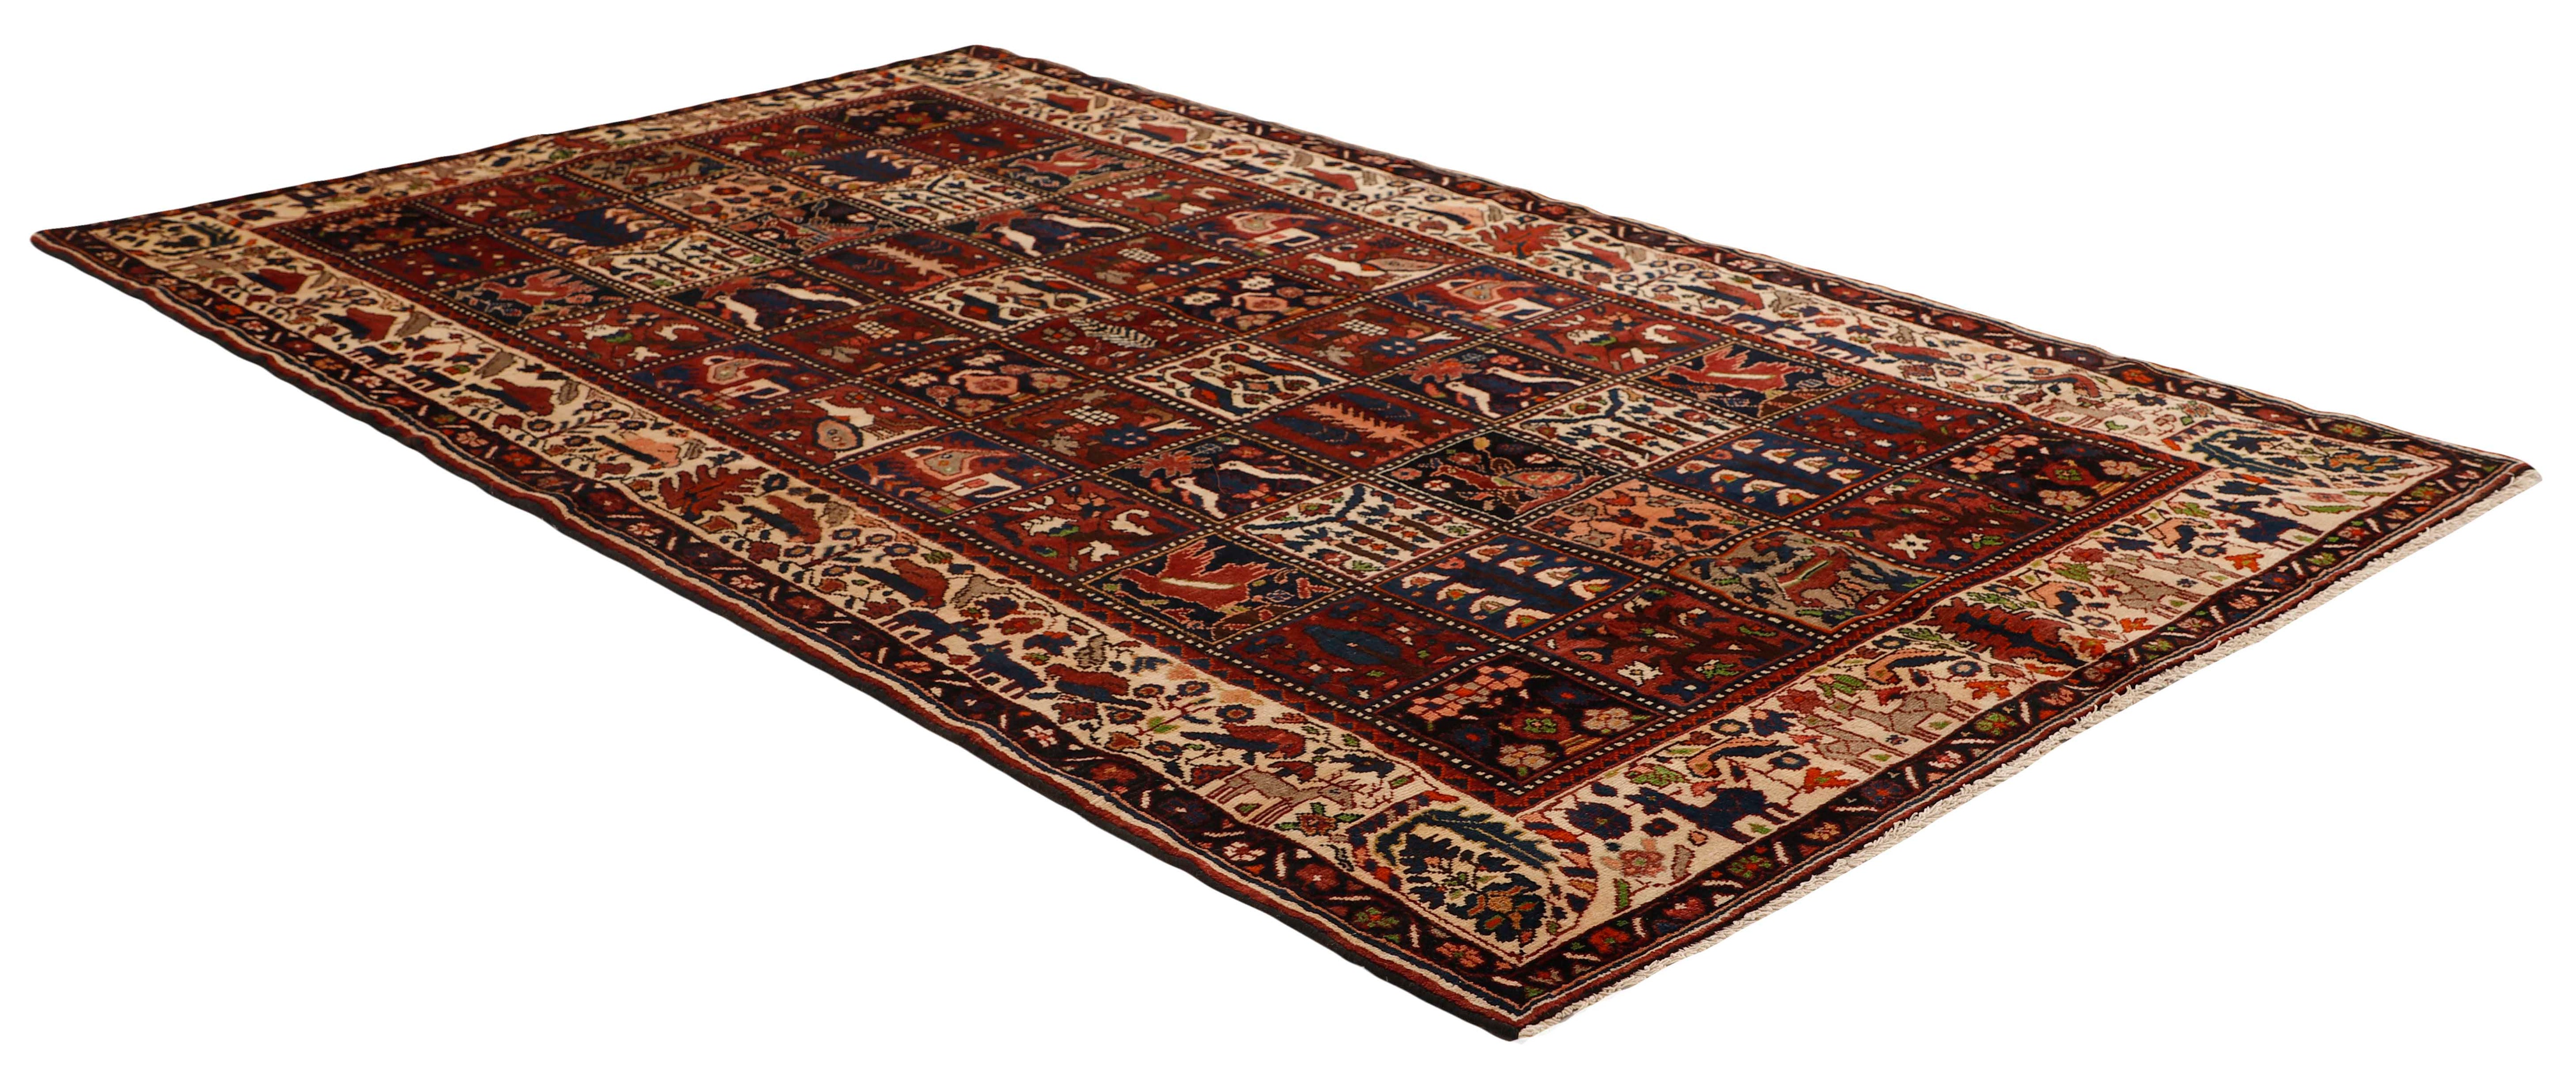 Authentic persian rug with traditional pattern in red